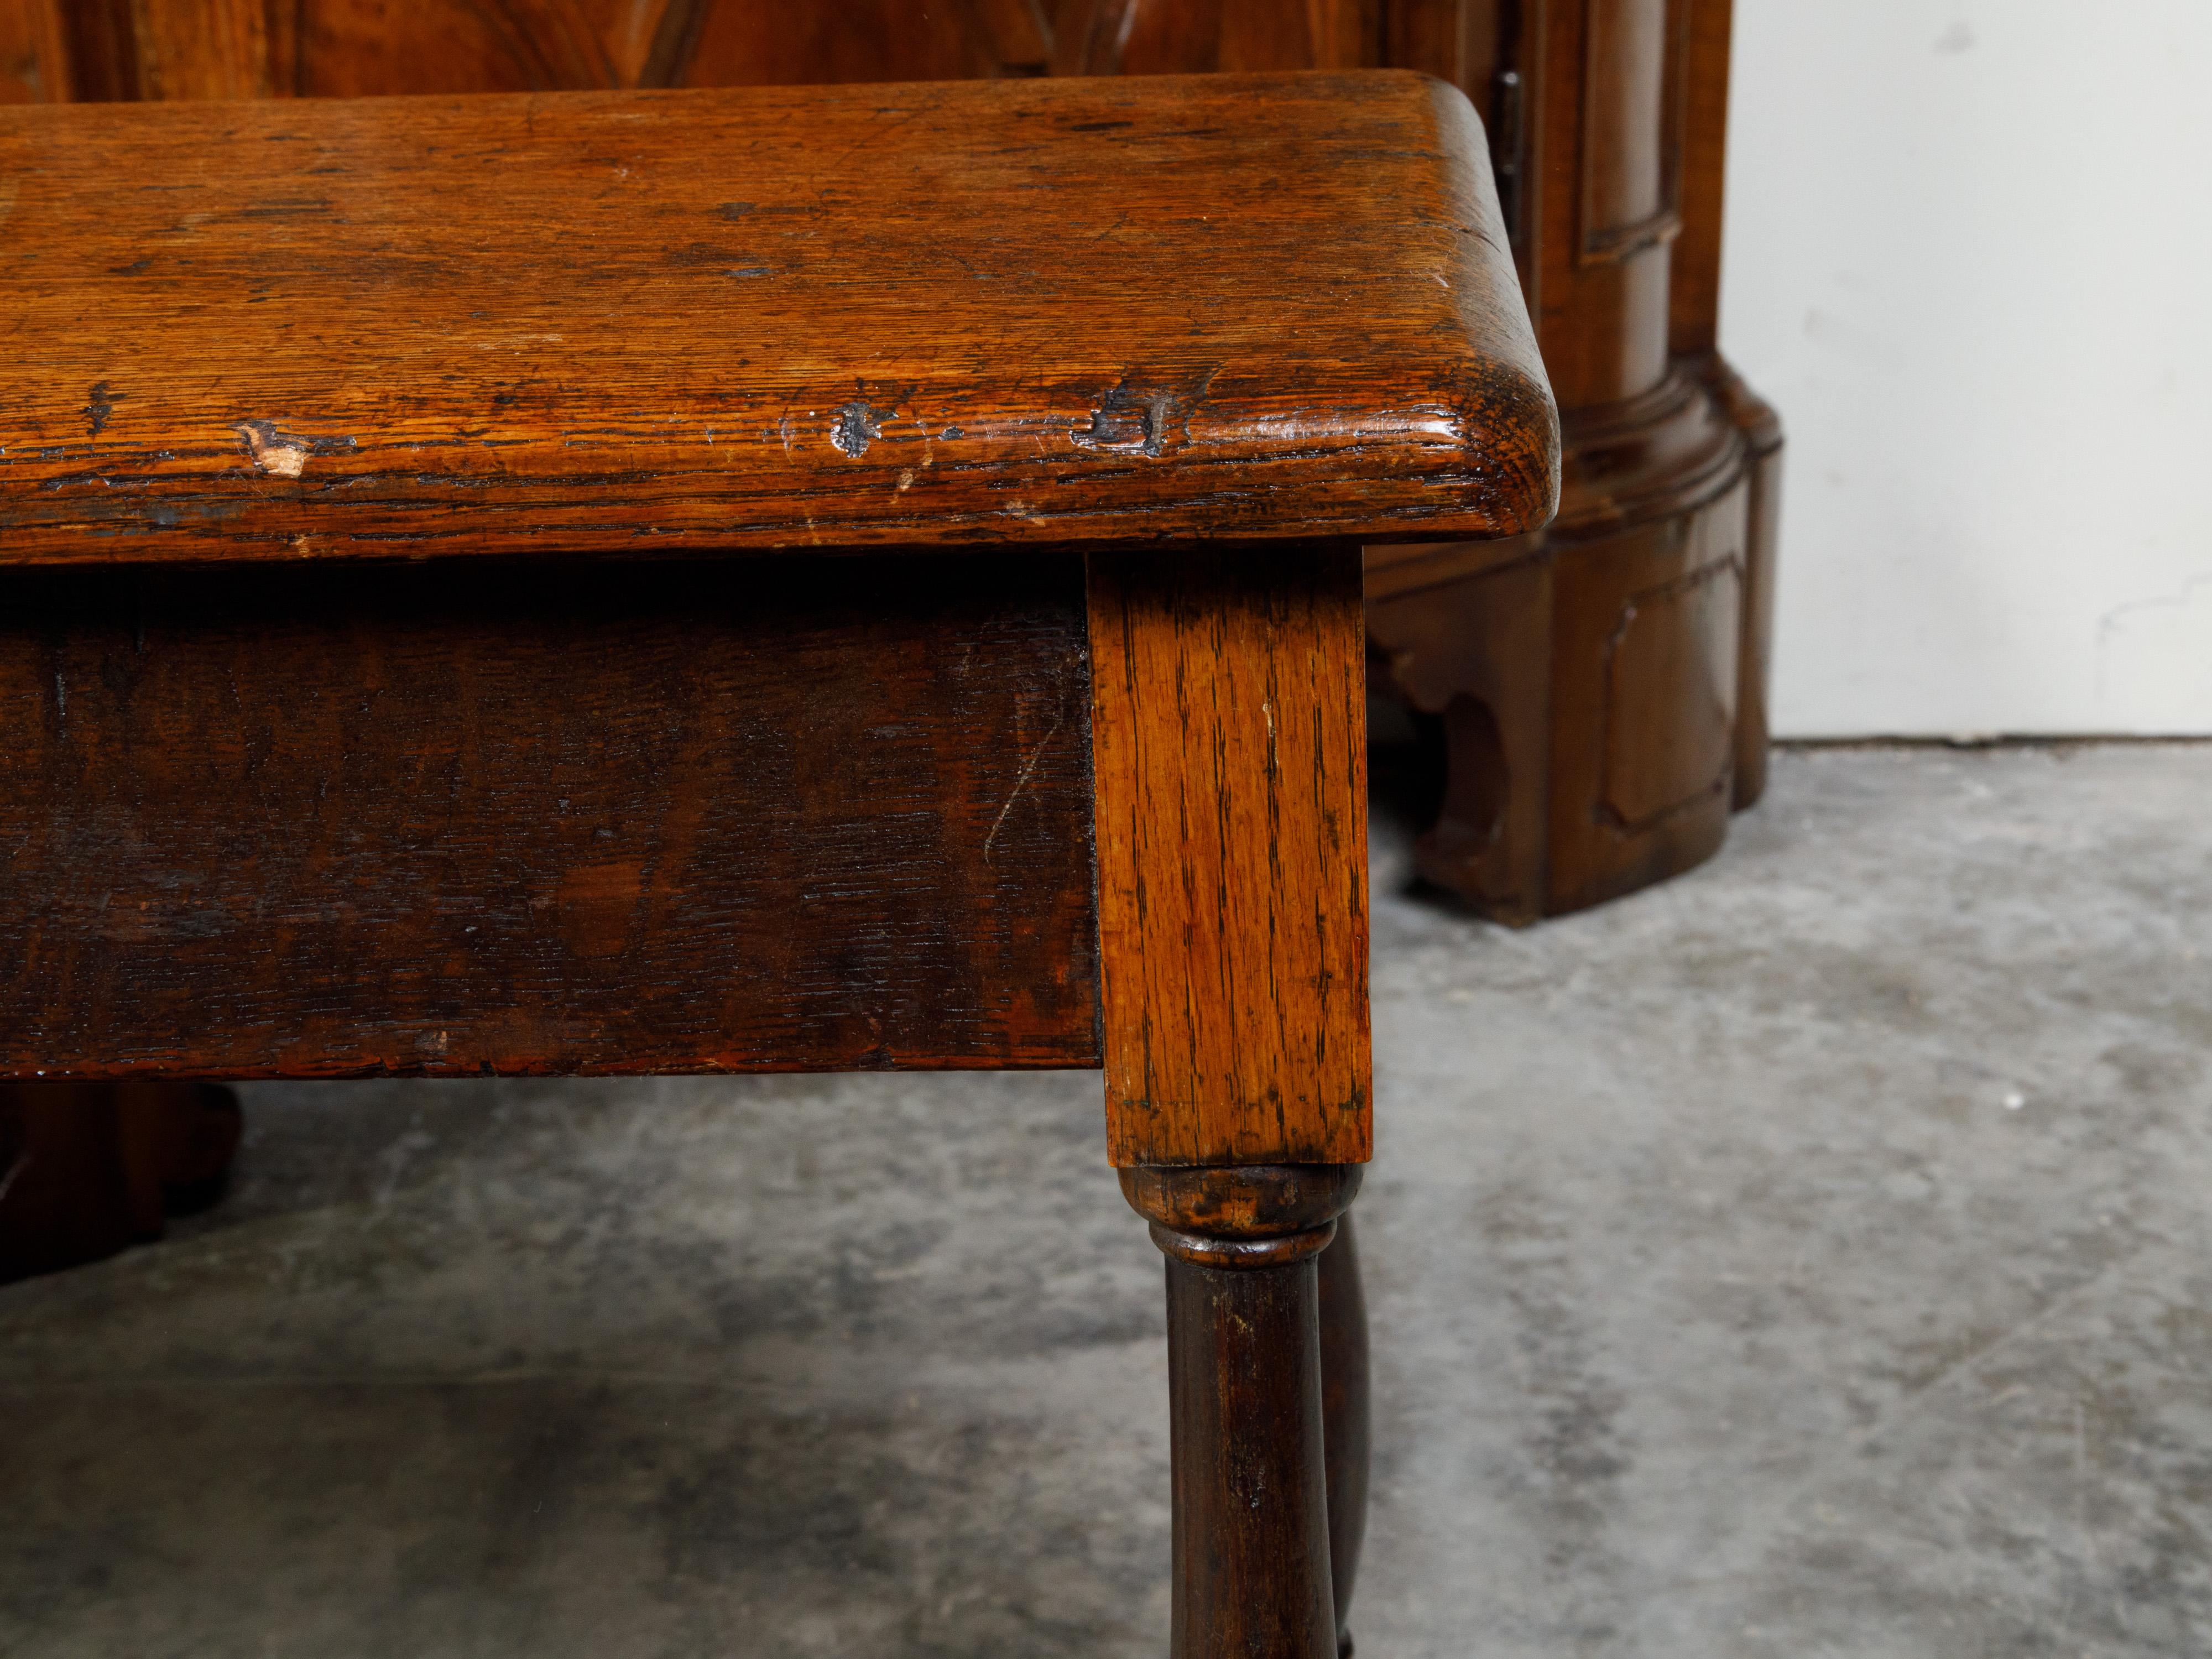 Turned English 1900s Turn of the Century Oak Bench with Splaying Column-Shaped Legs